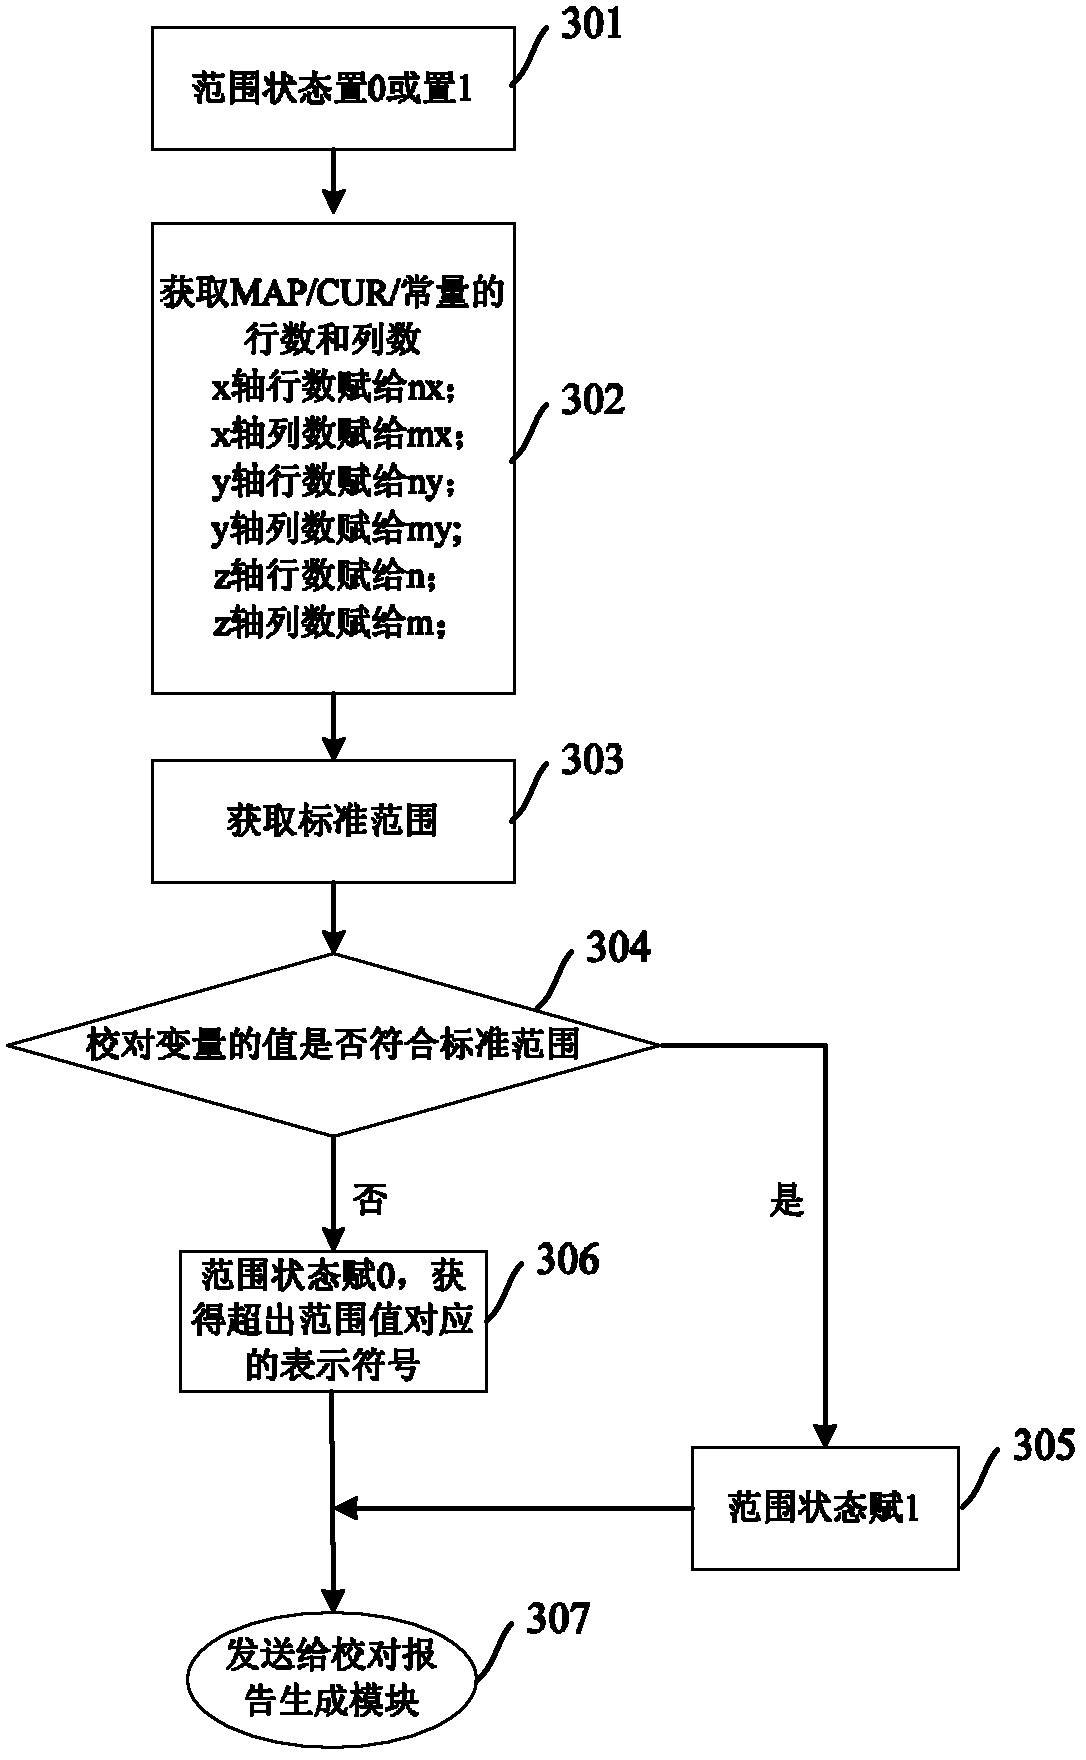 System and method for proofreading electric control data of diesel engine